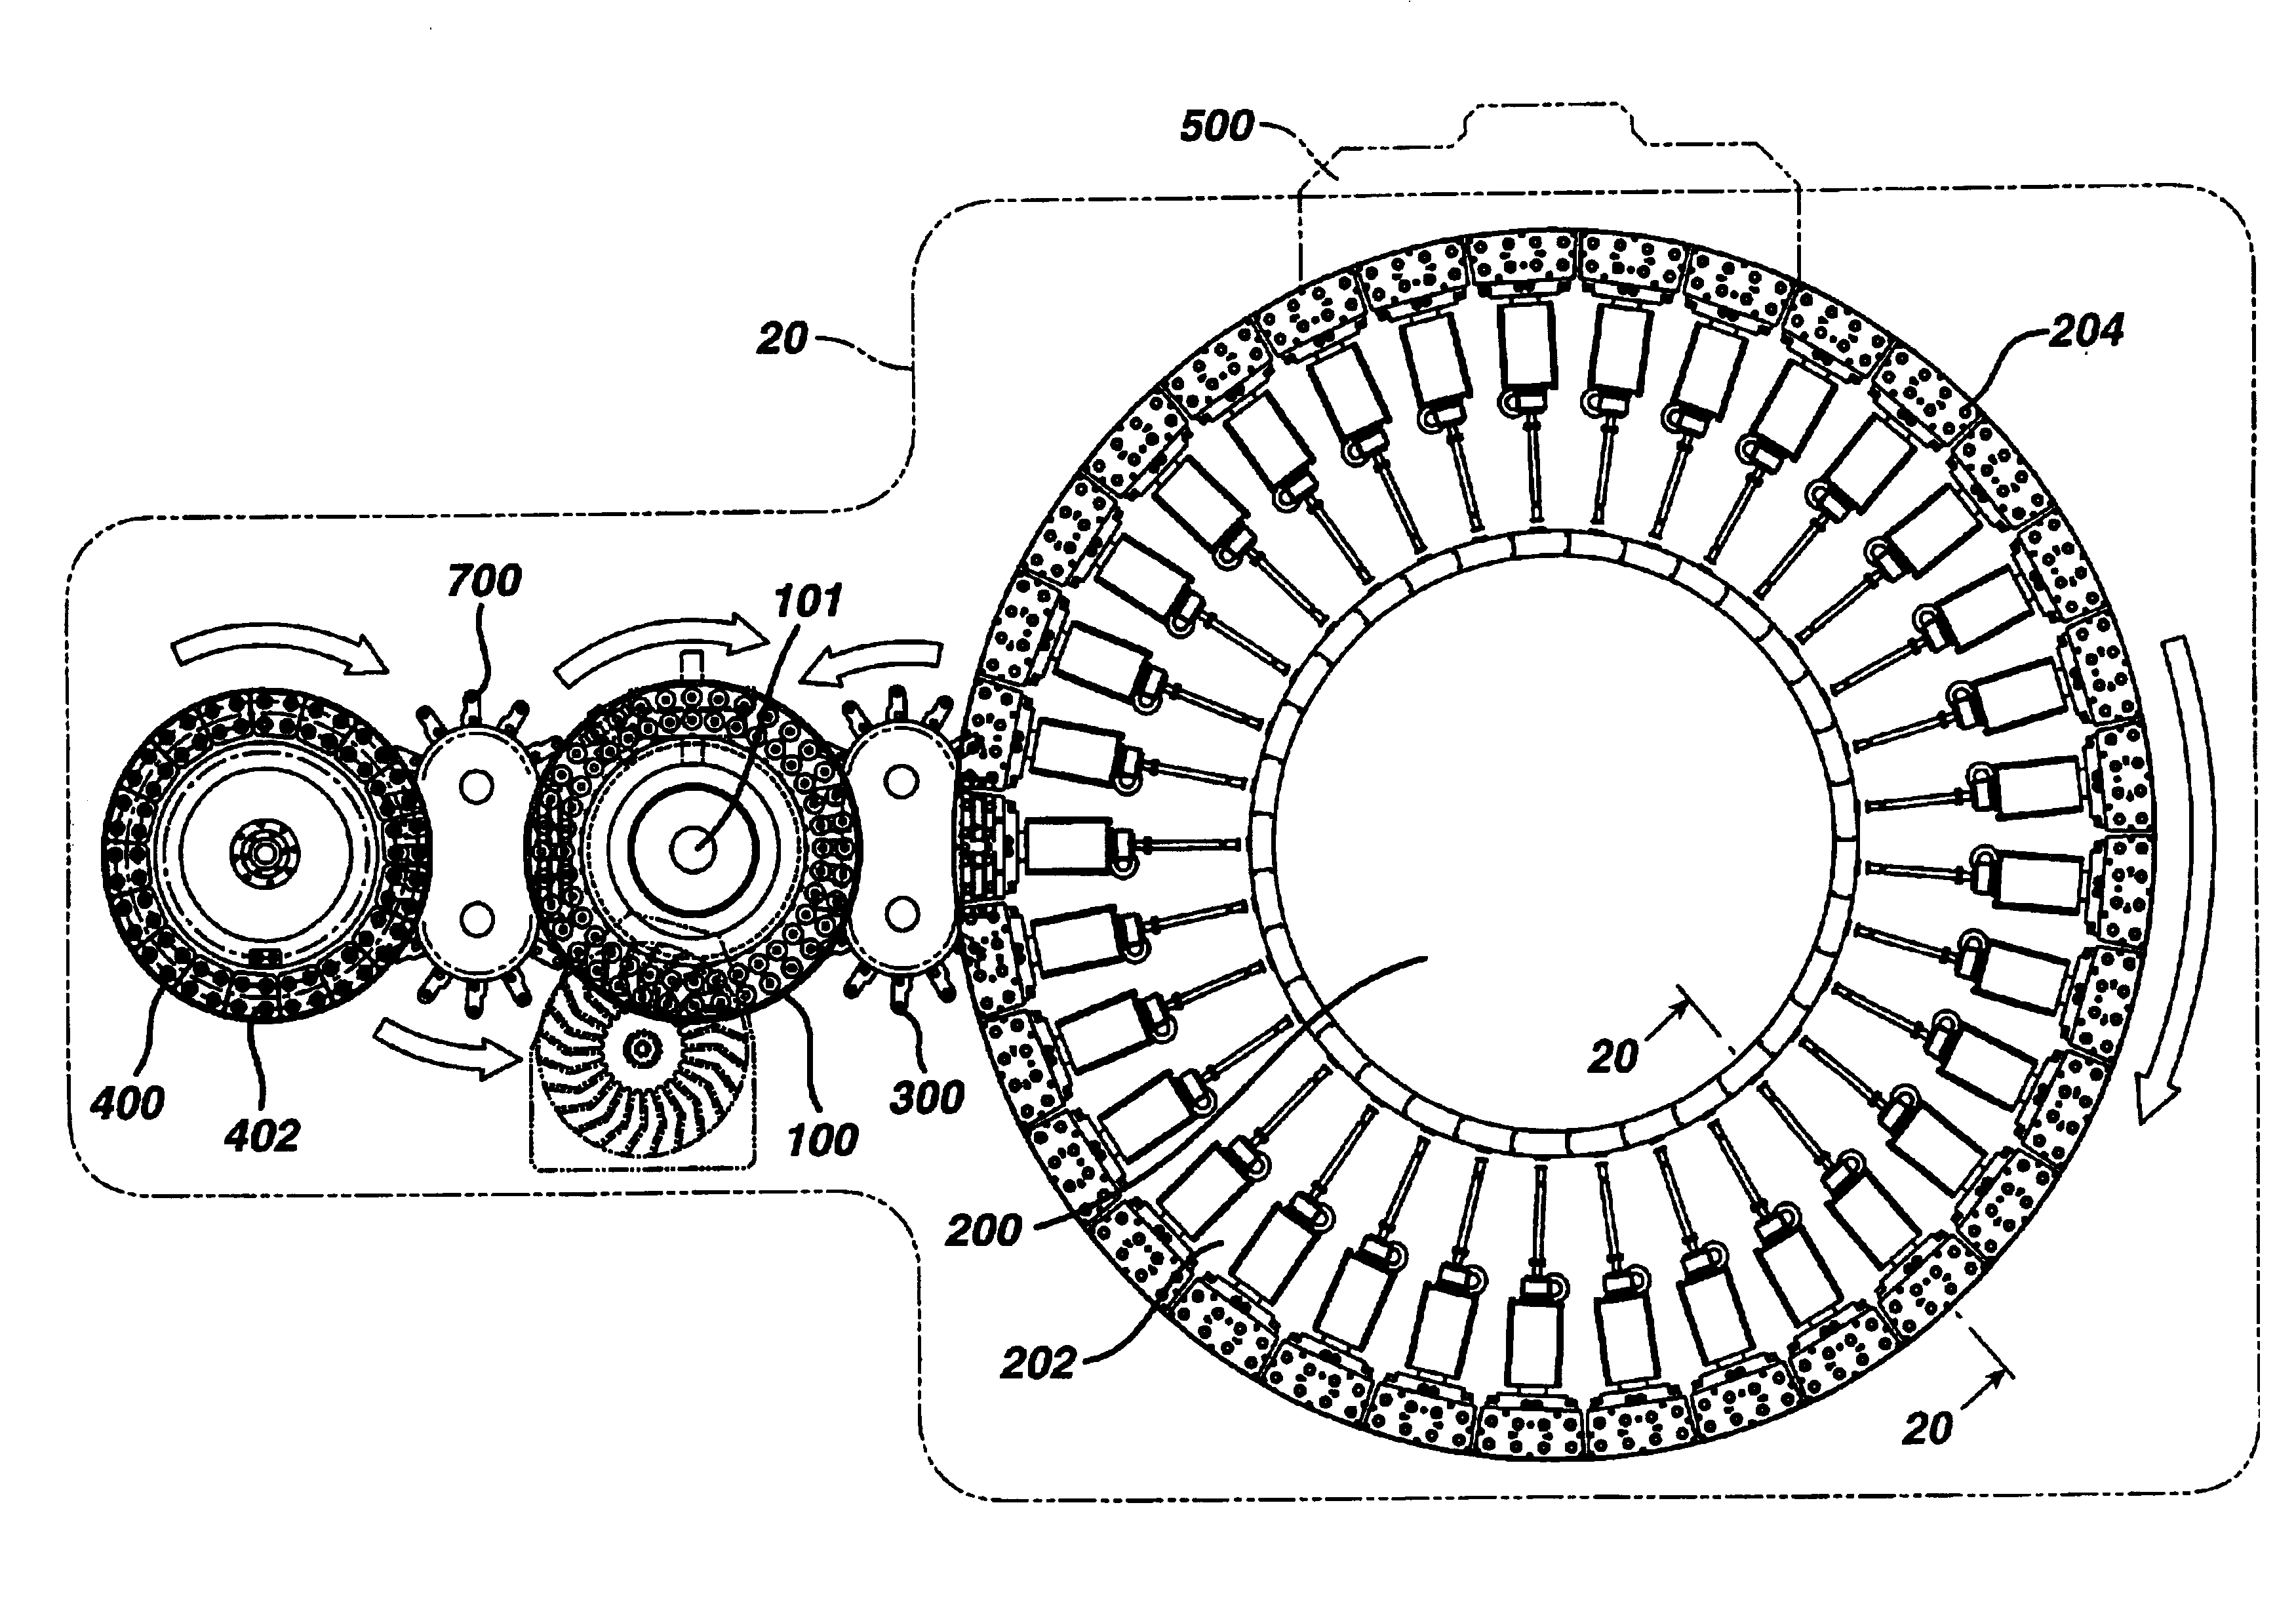 Apparatus for manufacturing dosage forms